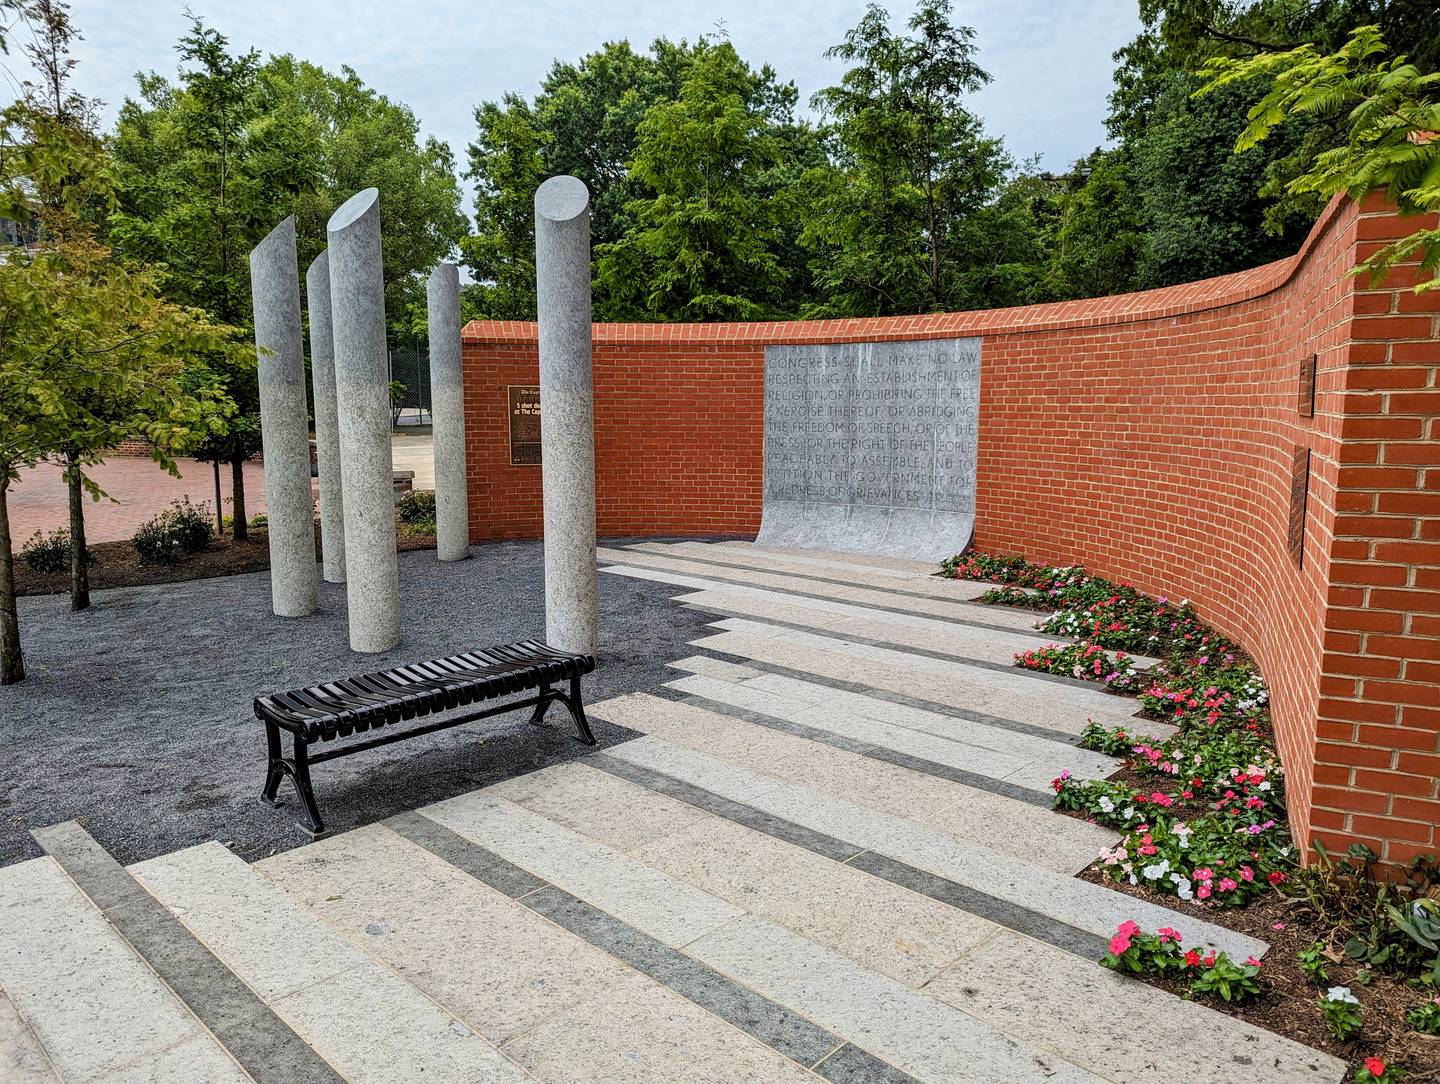 Annapolis will hold a memorial service Wednesday at the Guardians of the Free Press Memorial for five people killed in the June 28, 2018 shooting in the Capital Gazette newsroom.